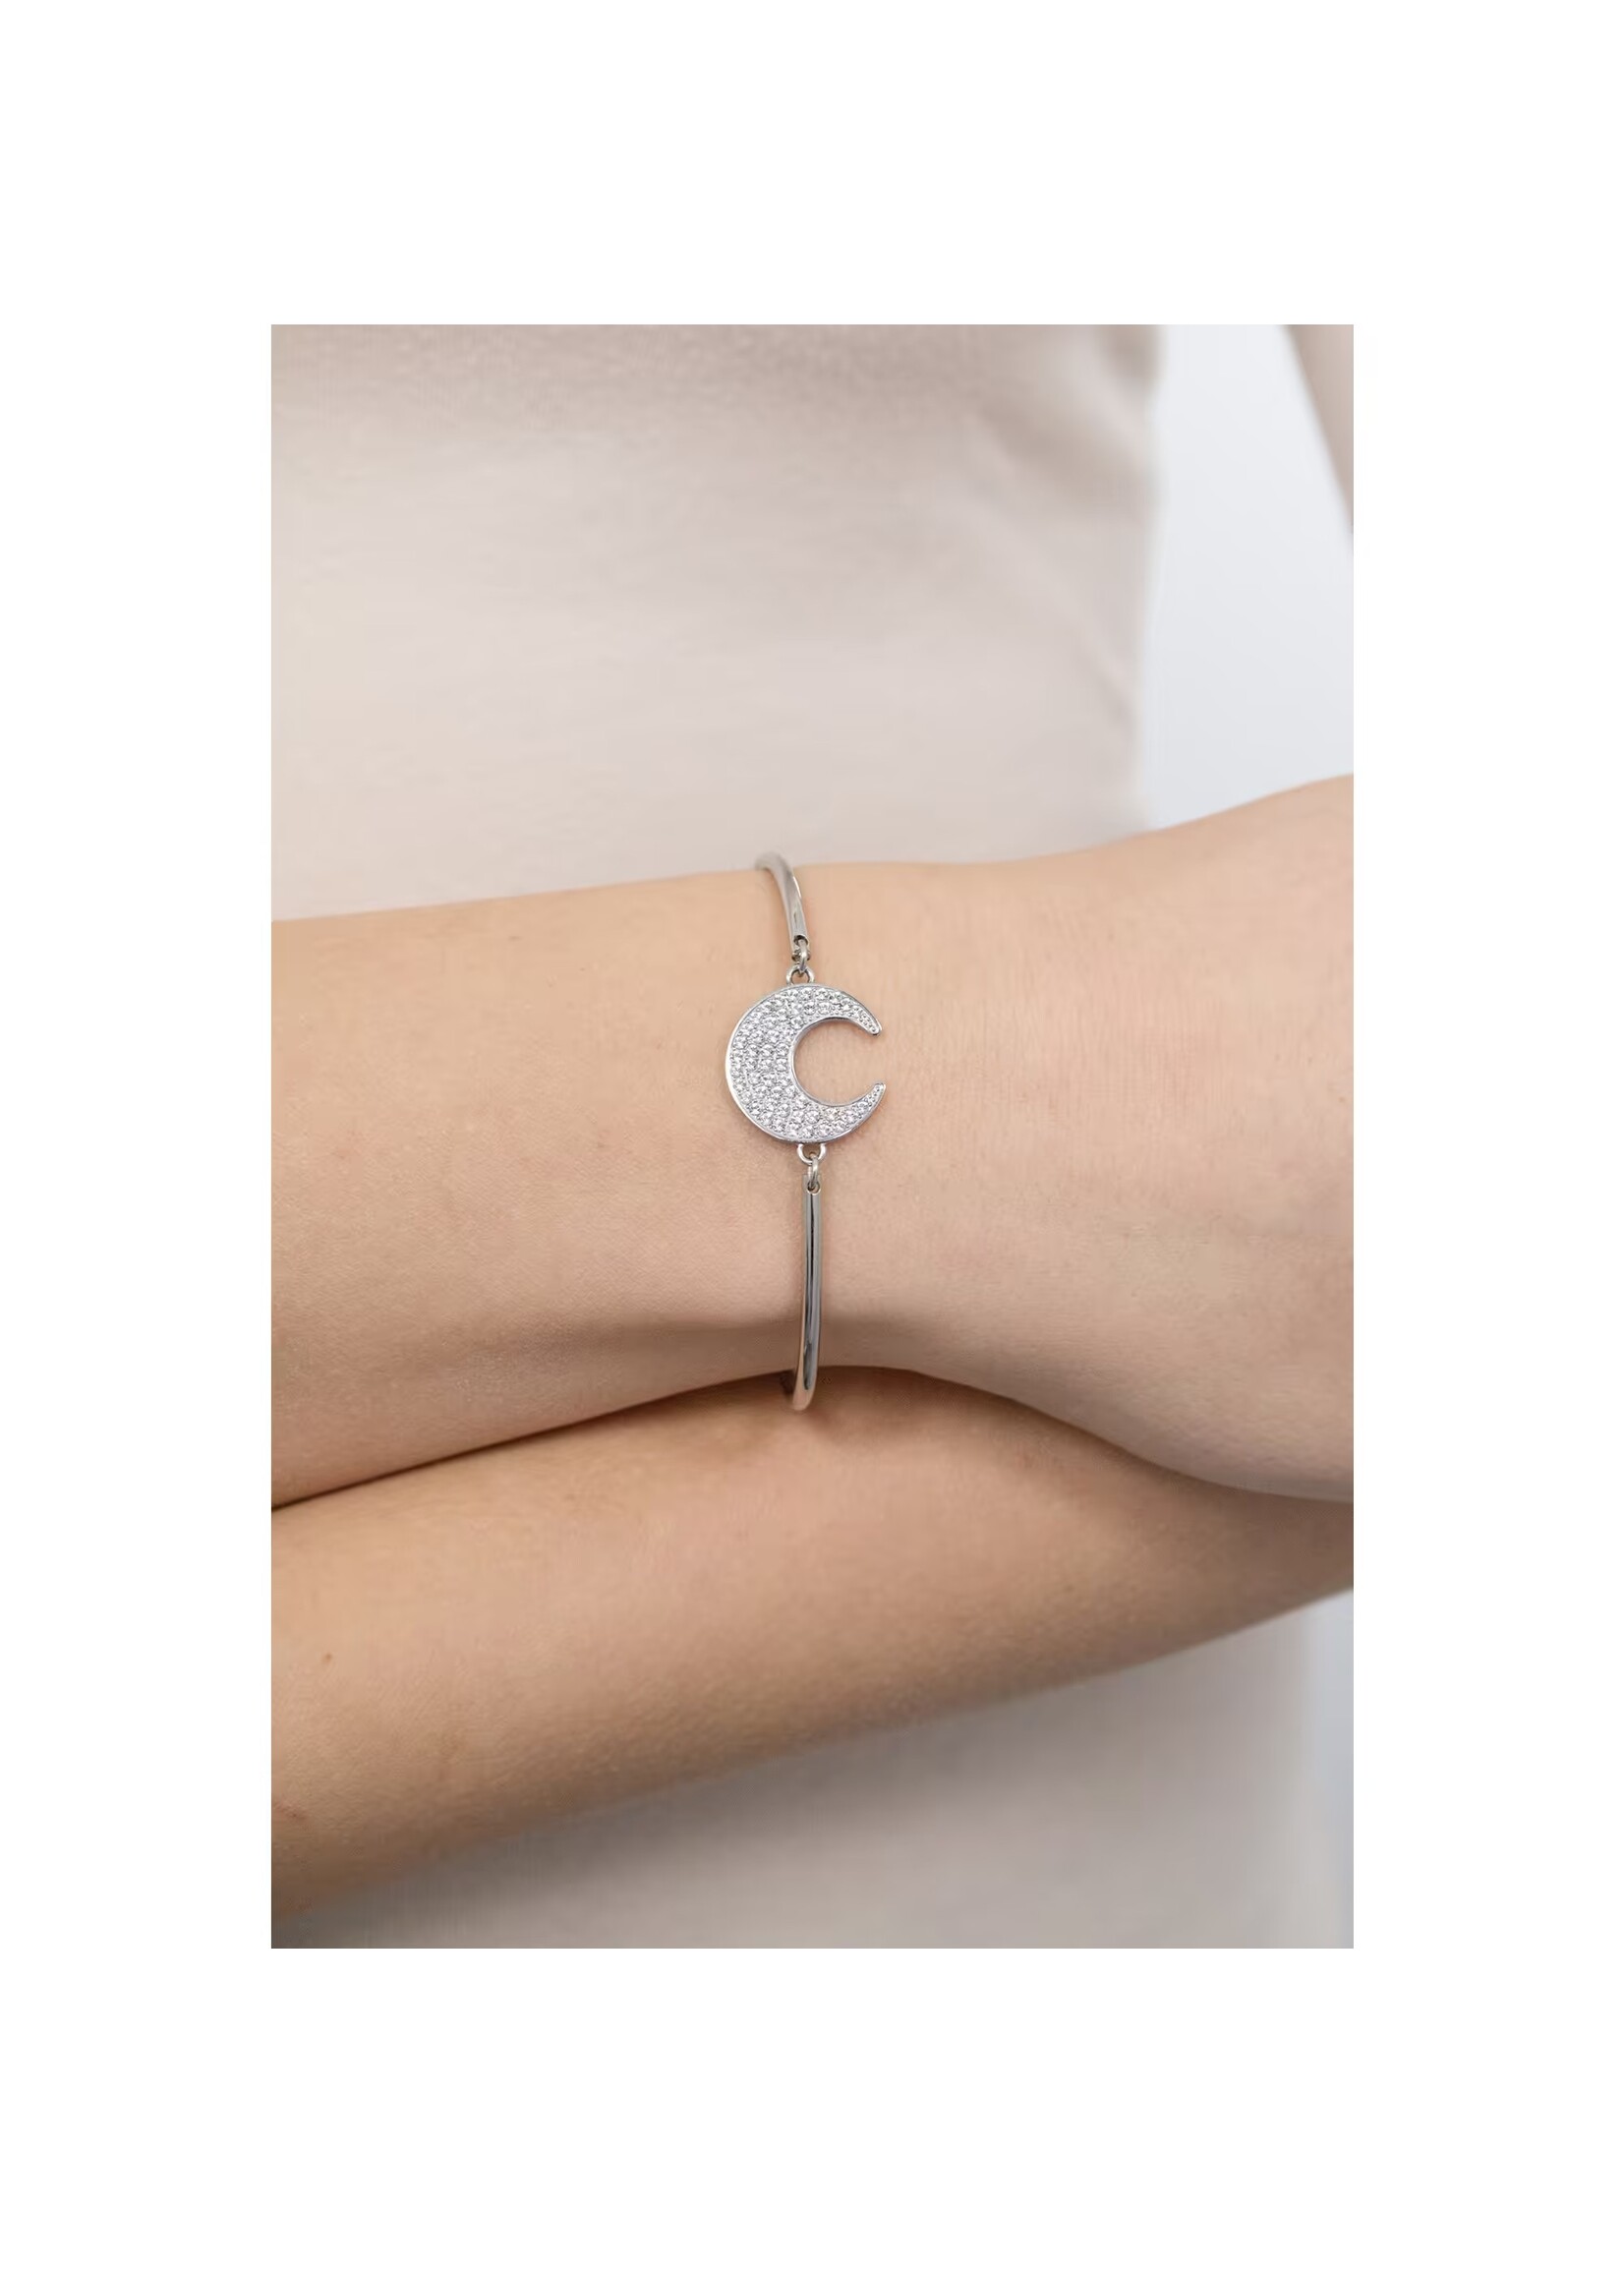 Brosway Stainless Steel Pave Crescent Moon Bracelet